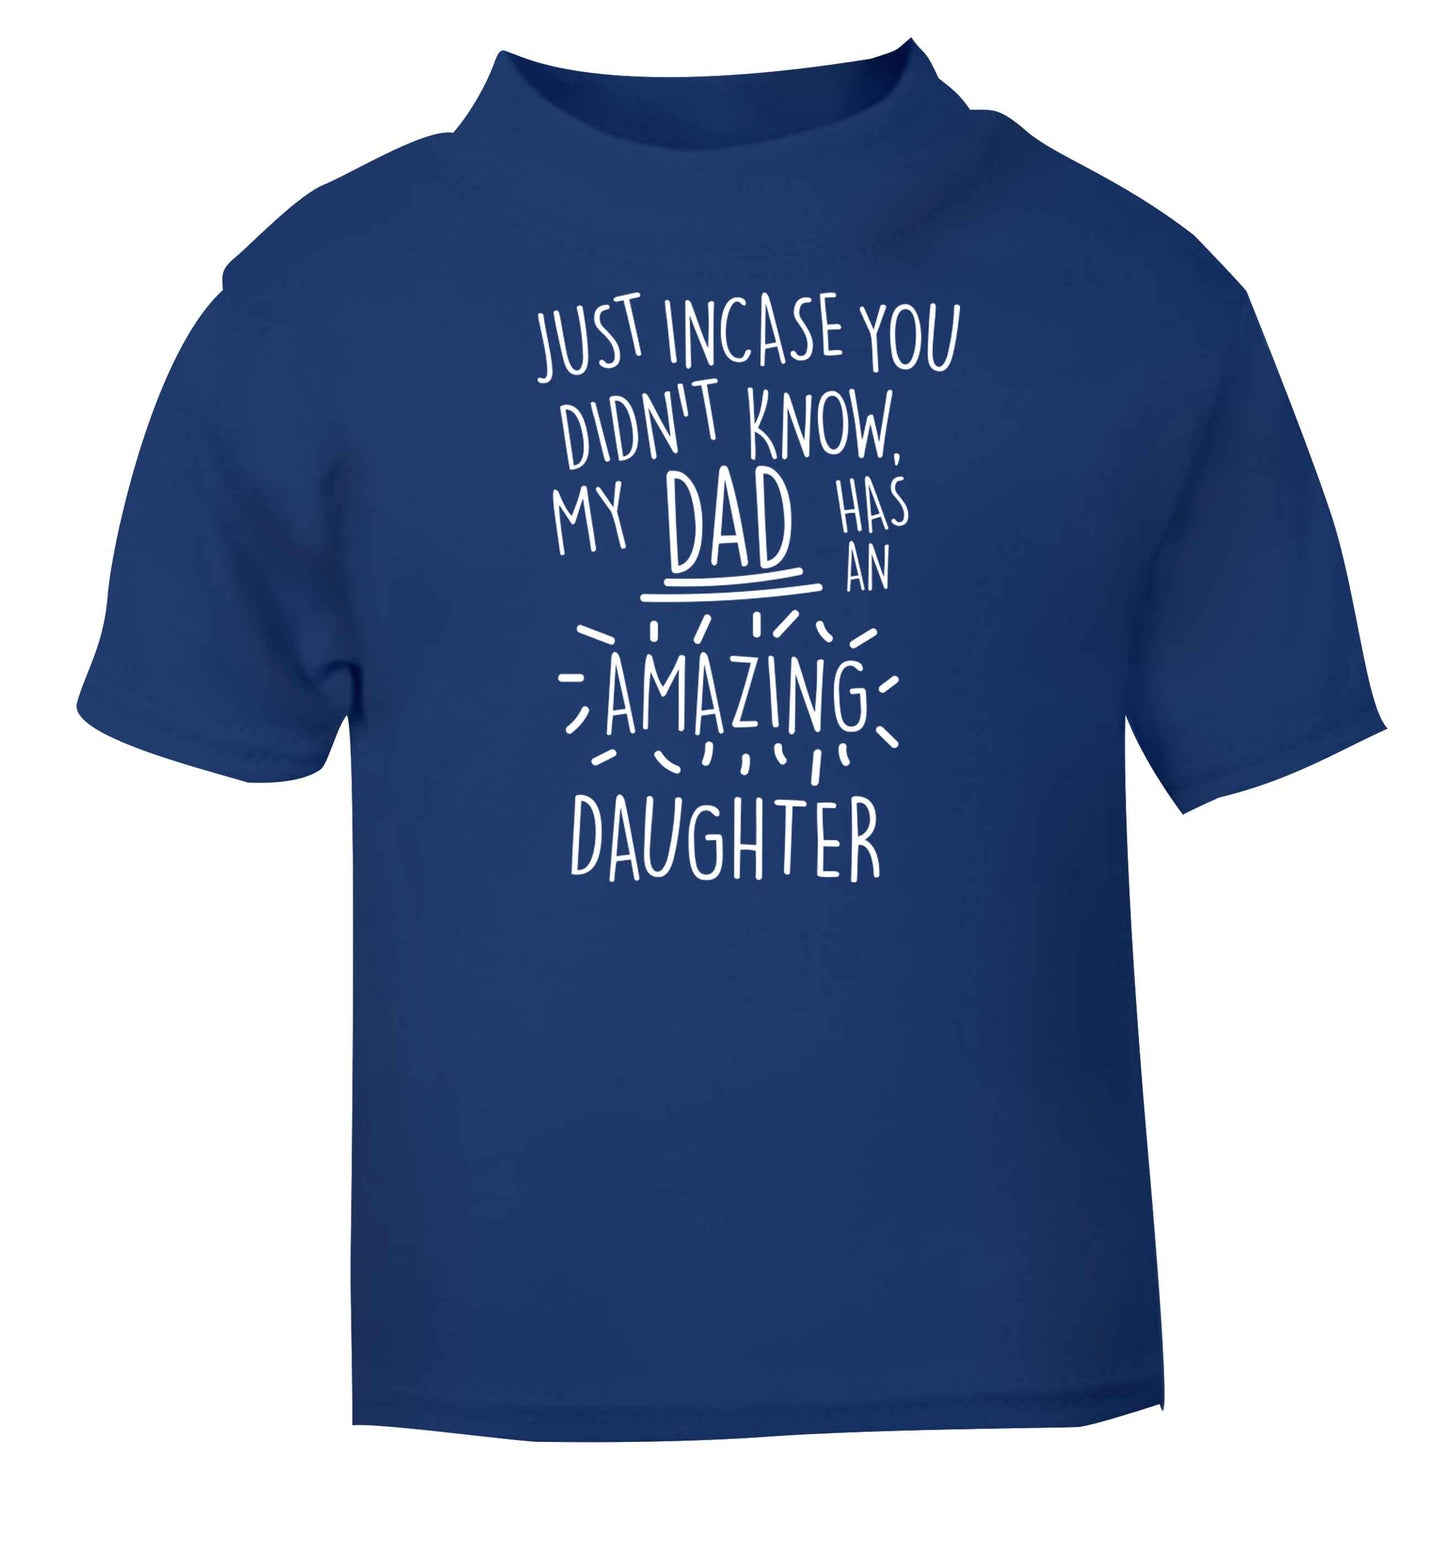 Just incase you didn't know my dad has an amazing daughter blue baby toddler Tshirt 2 Years